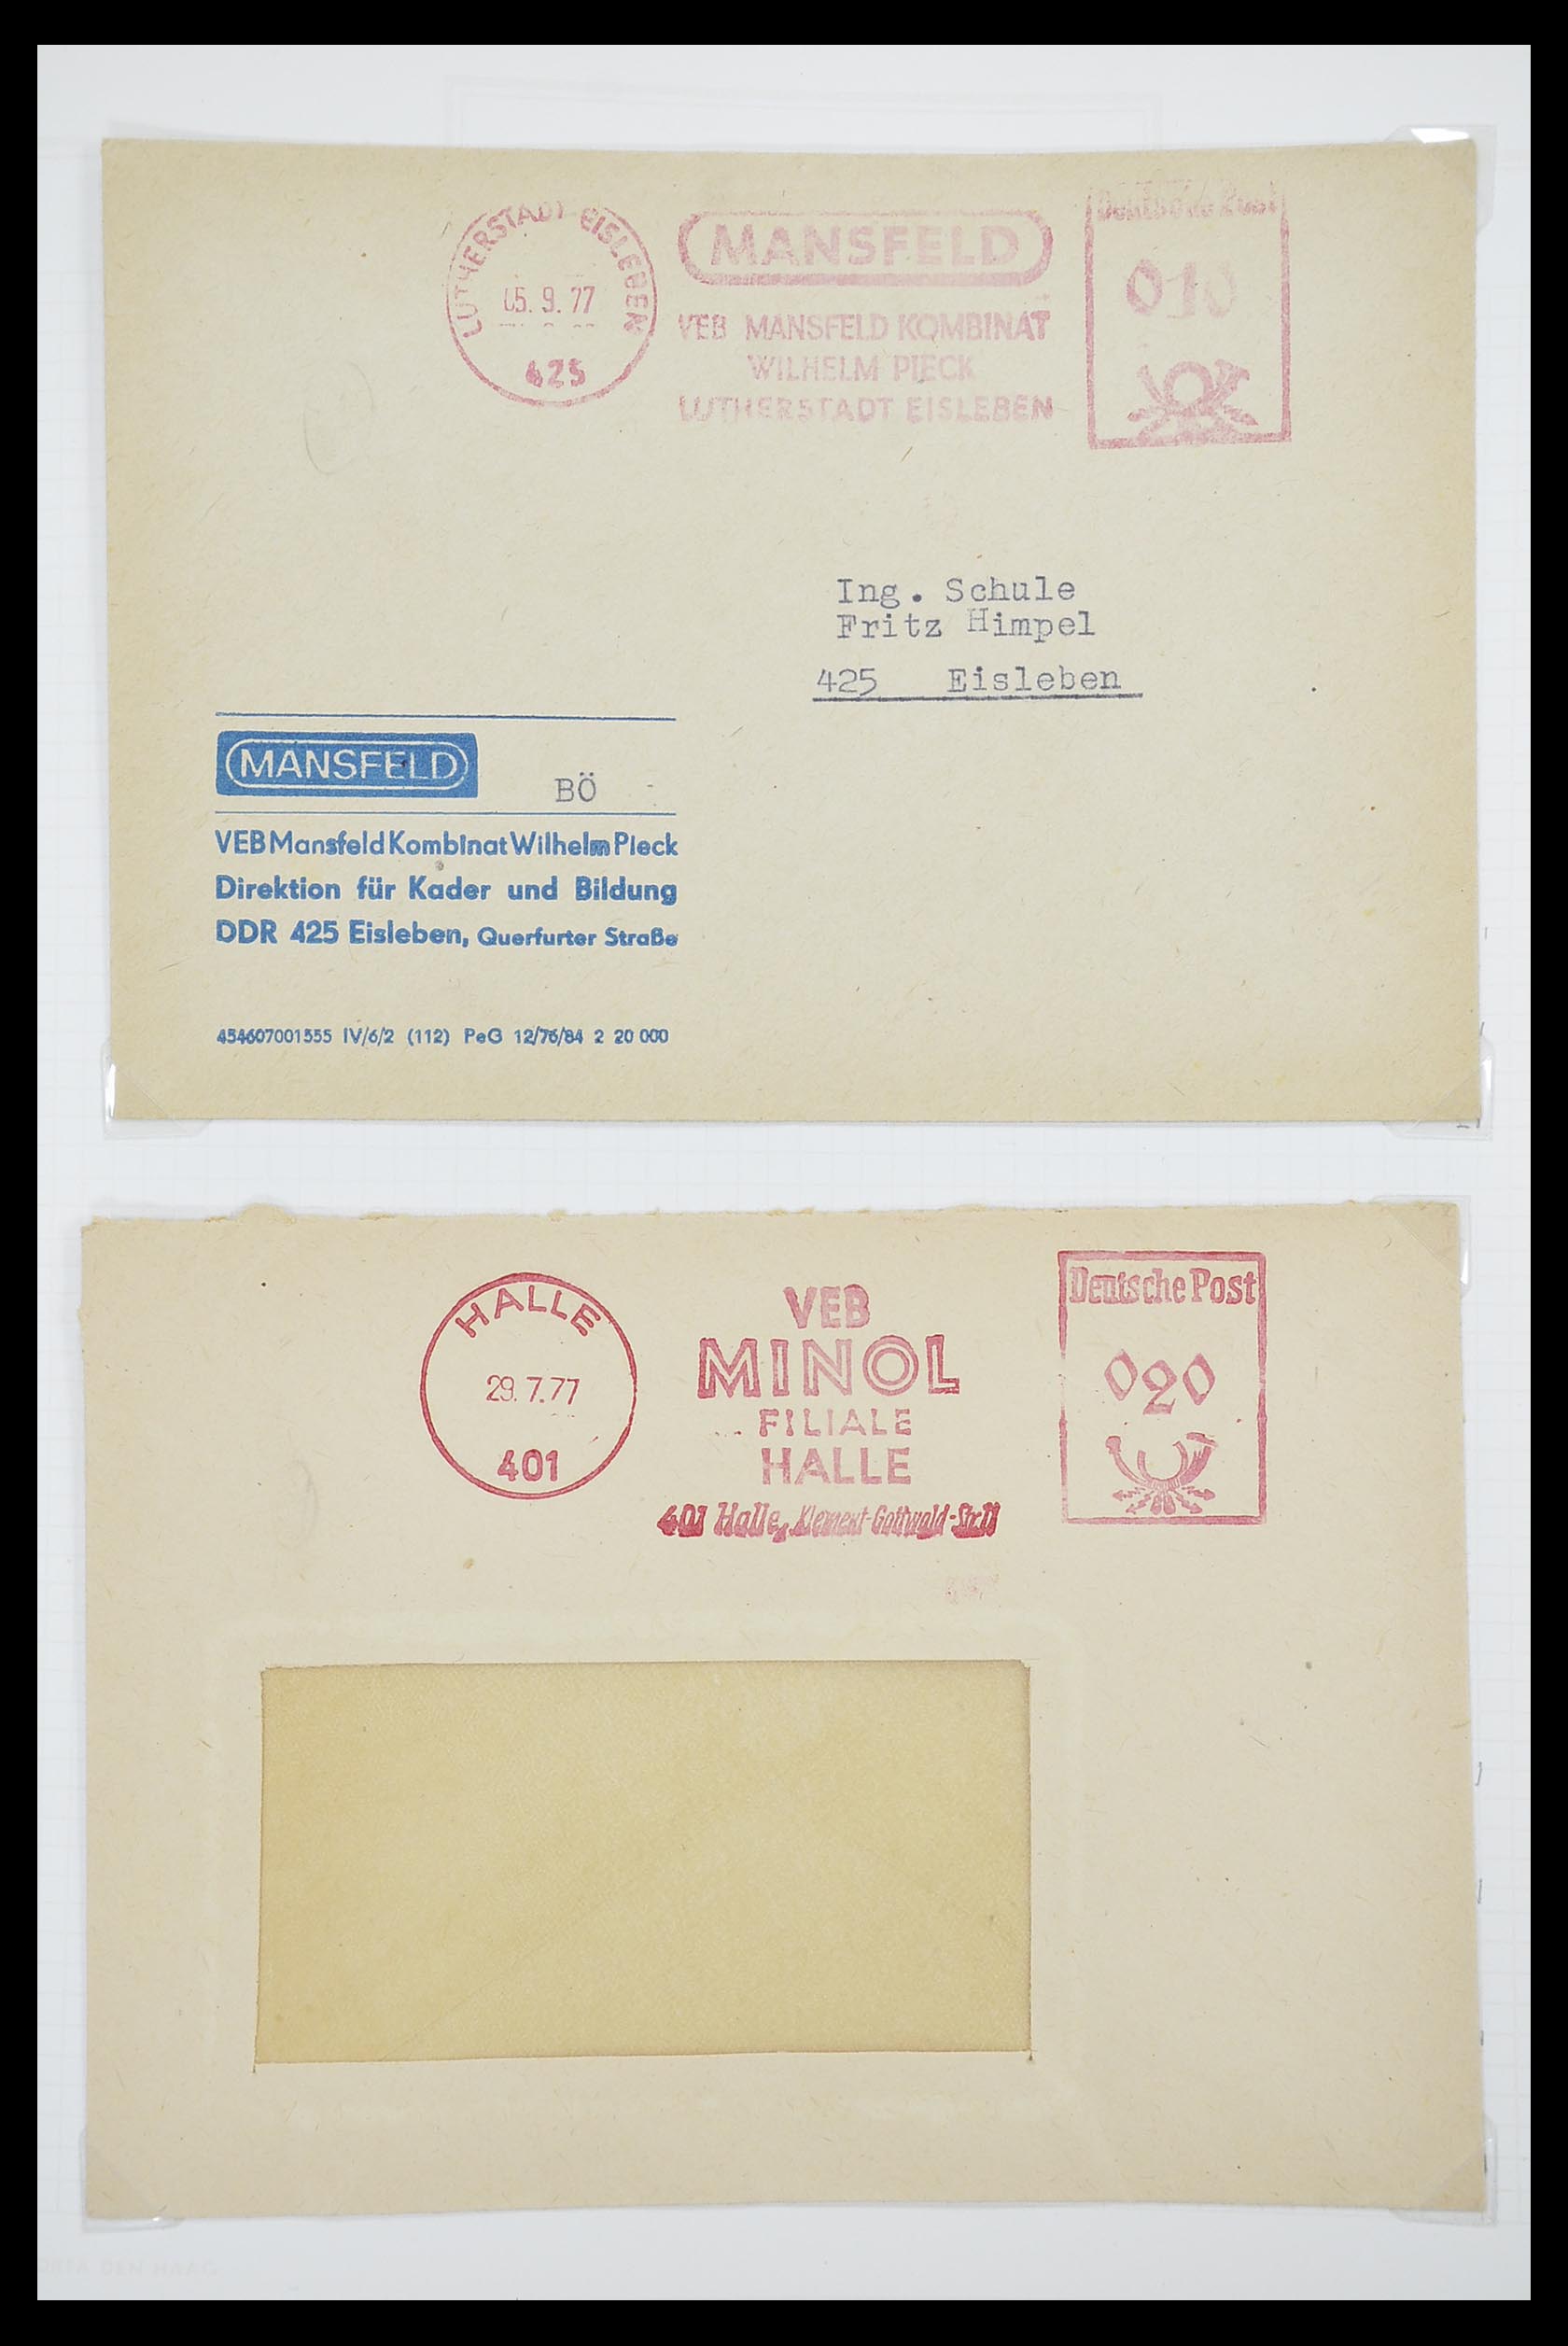 33883 051 - Stamp collection 33883 DDR service covers 1956-1986.